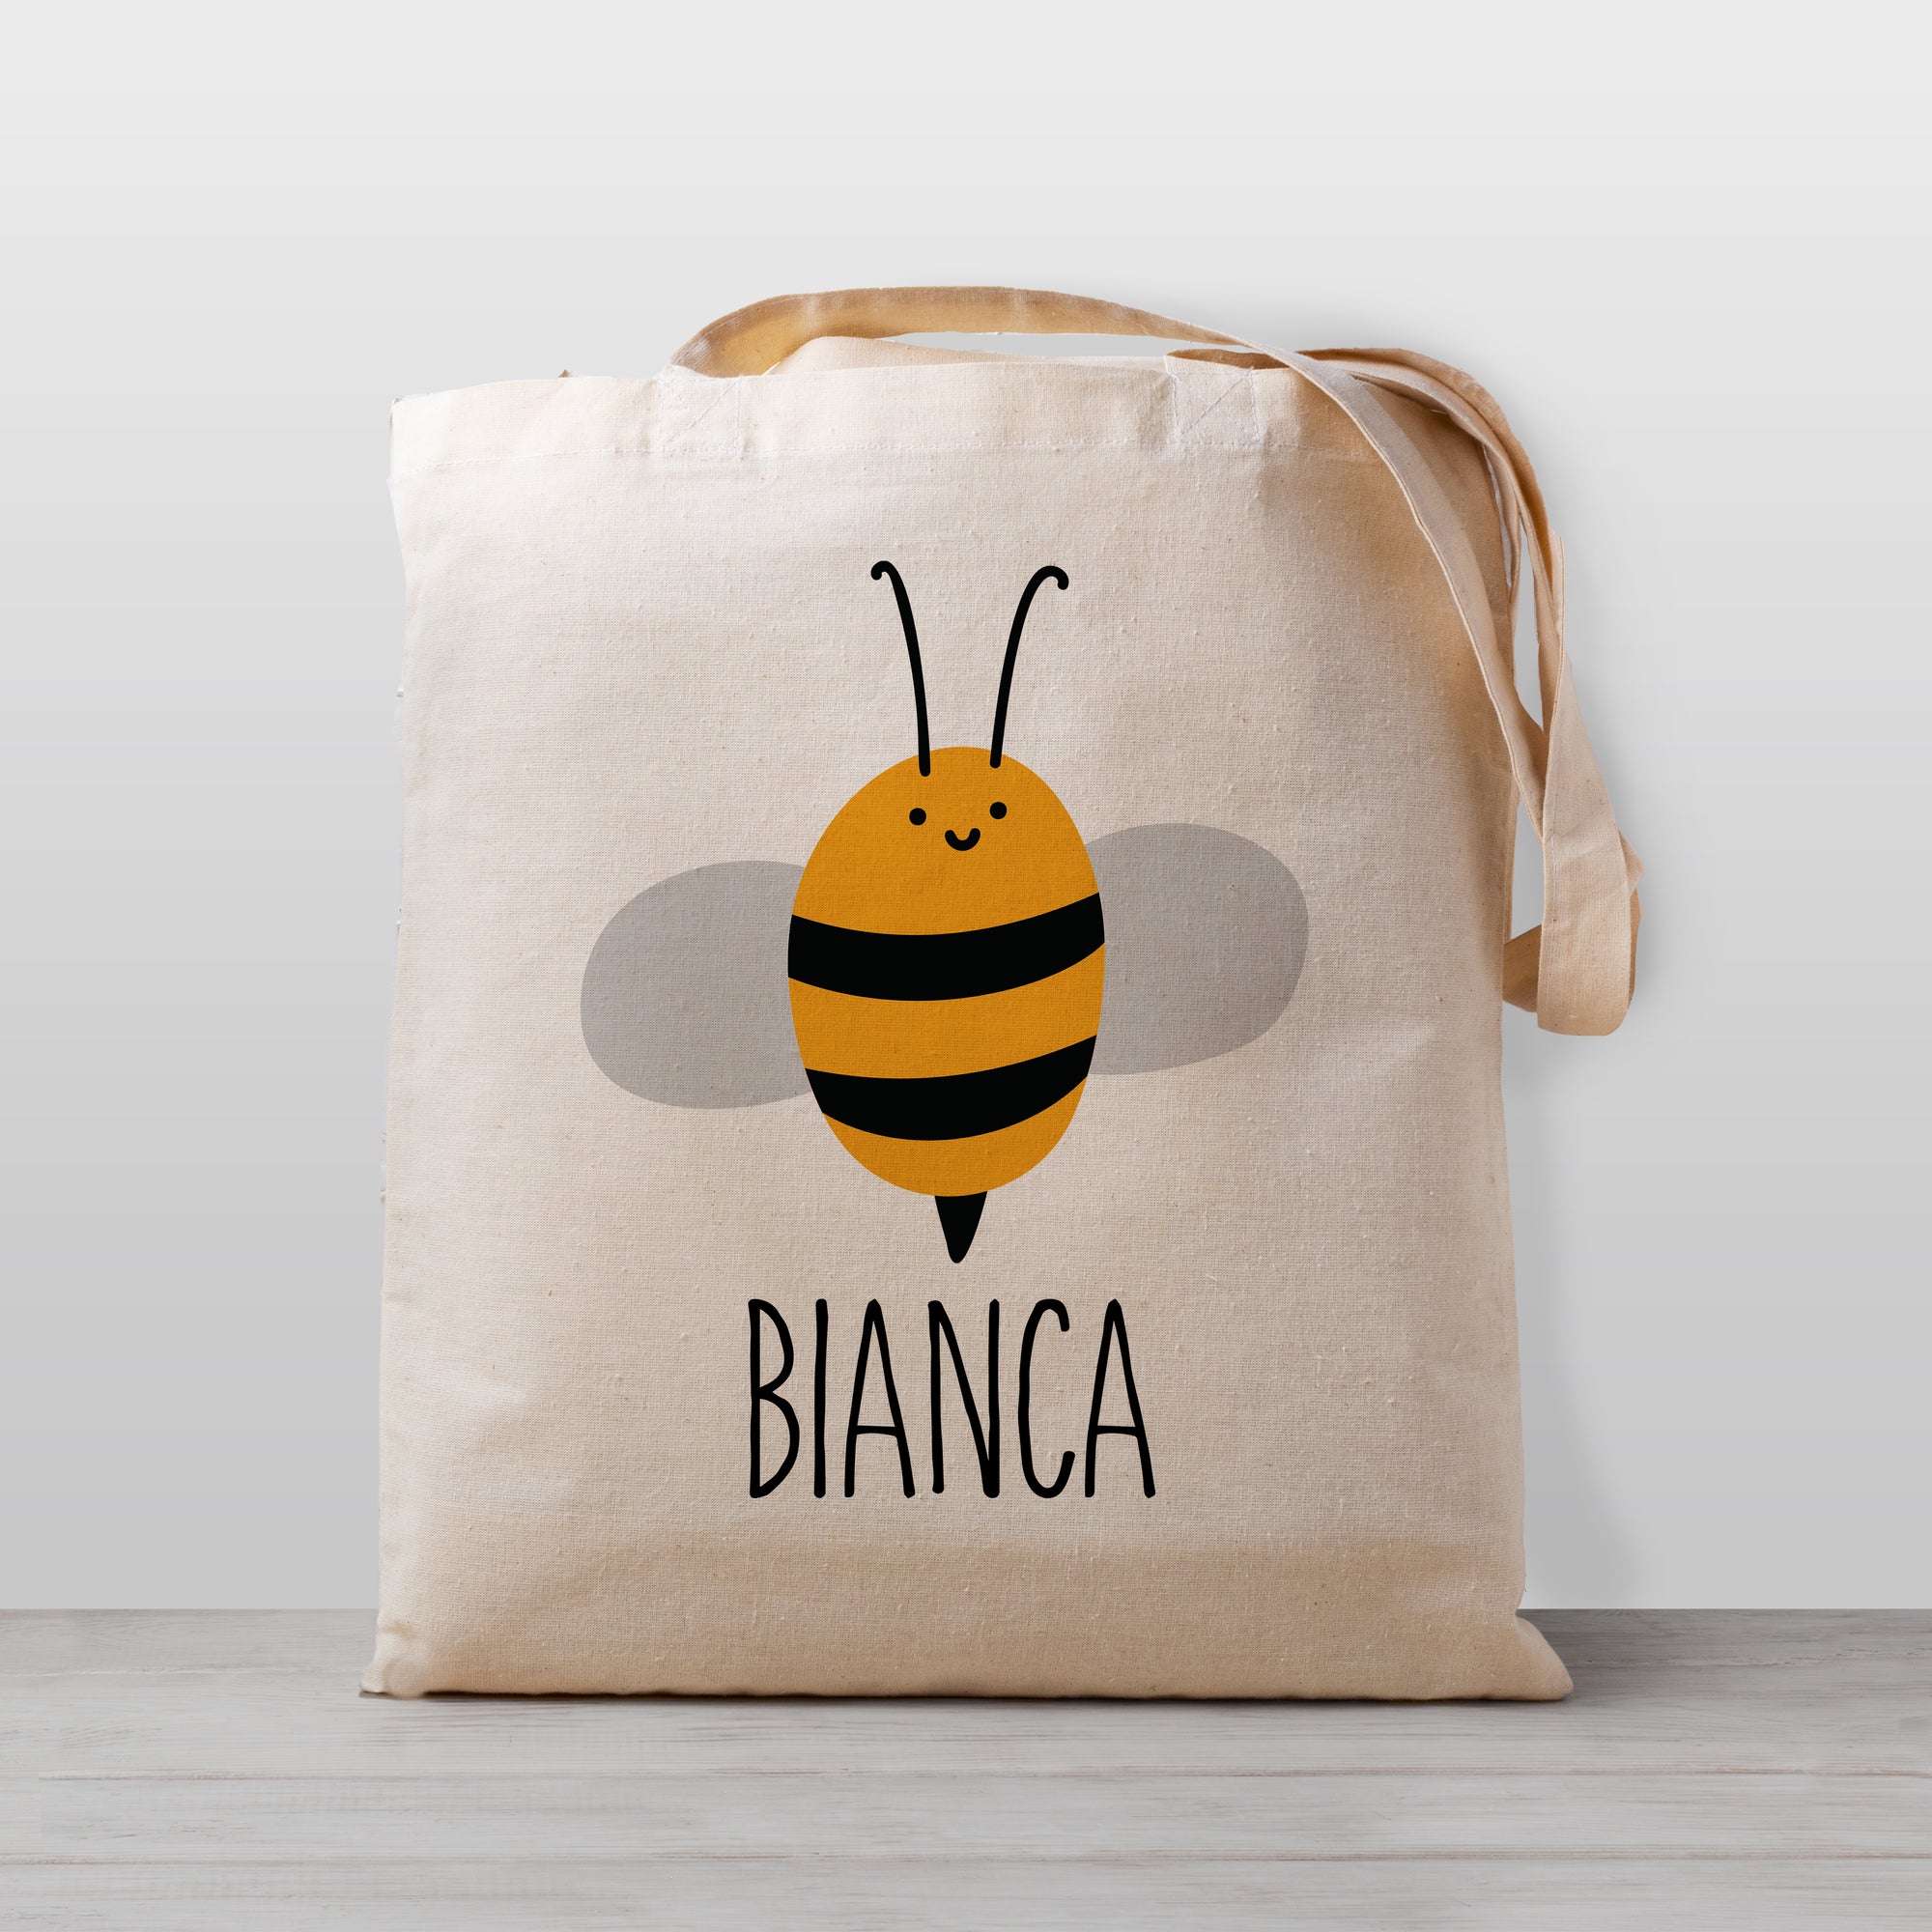 Bee Kid's tote bag, perfect for your little honey or bumble bee, gender neutral perfect for boys or girls, easy size to carry to preschool or daycare